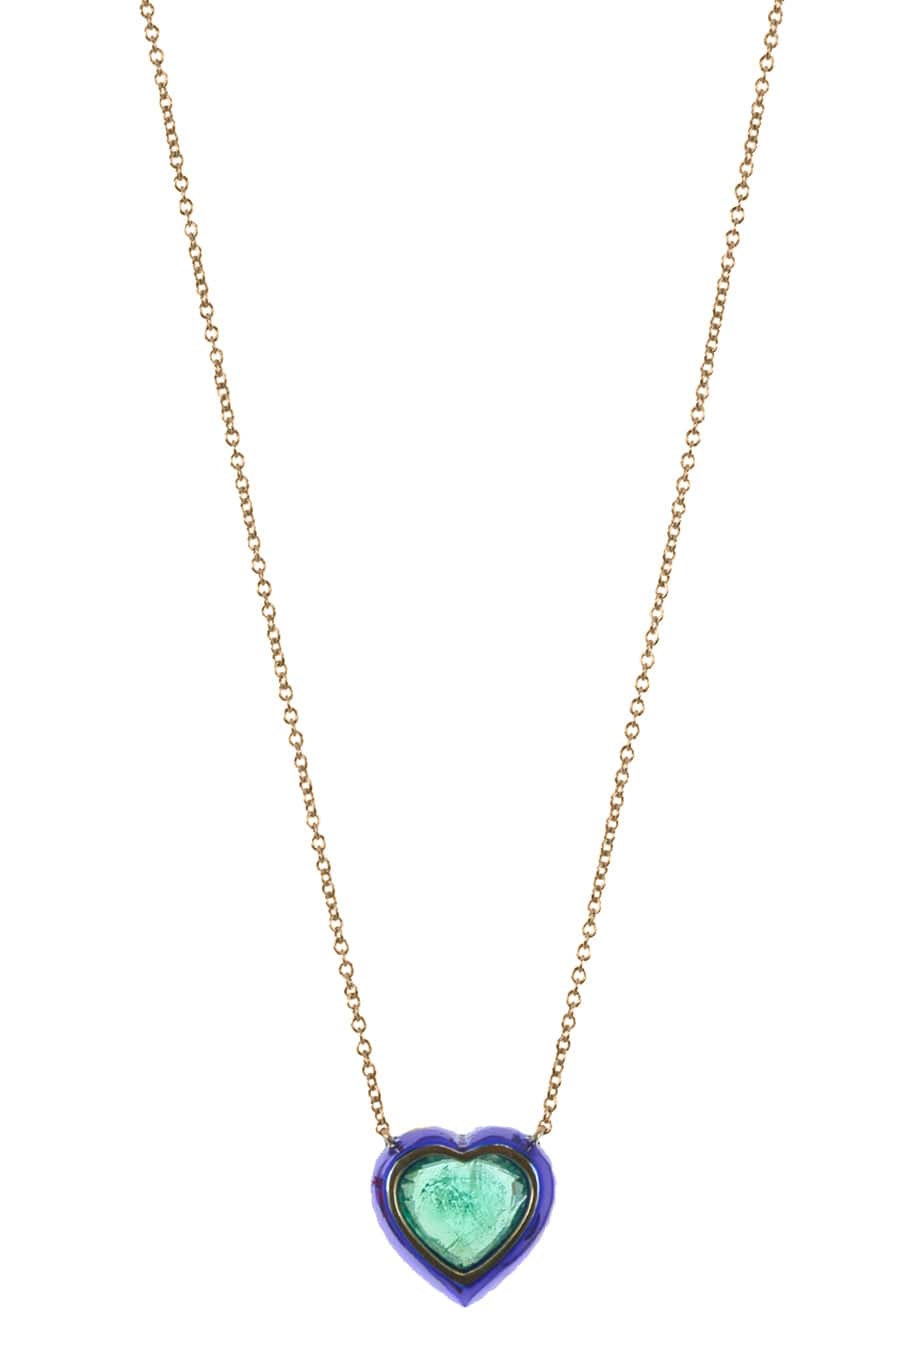 KATHERINE JETTER-Emerald and Blue Rhodium Heart Necklace-YELLOW GOLD